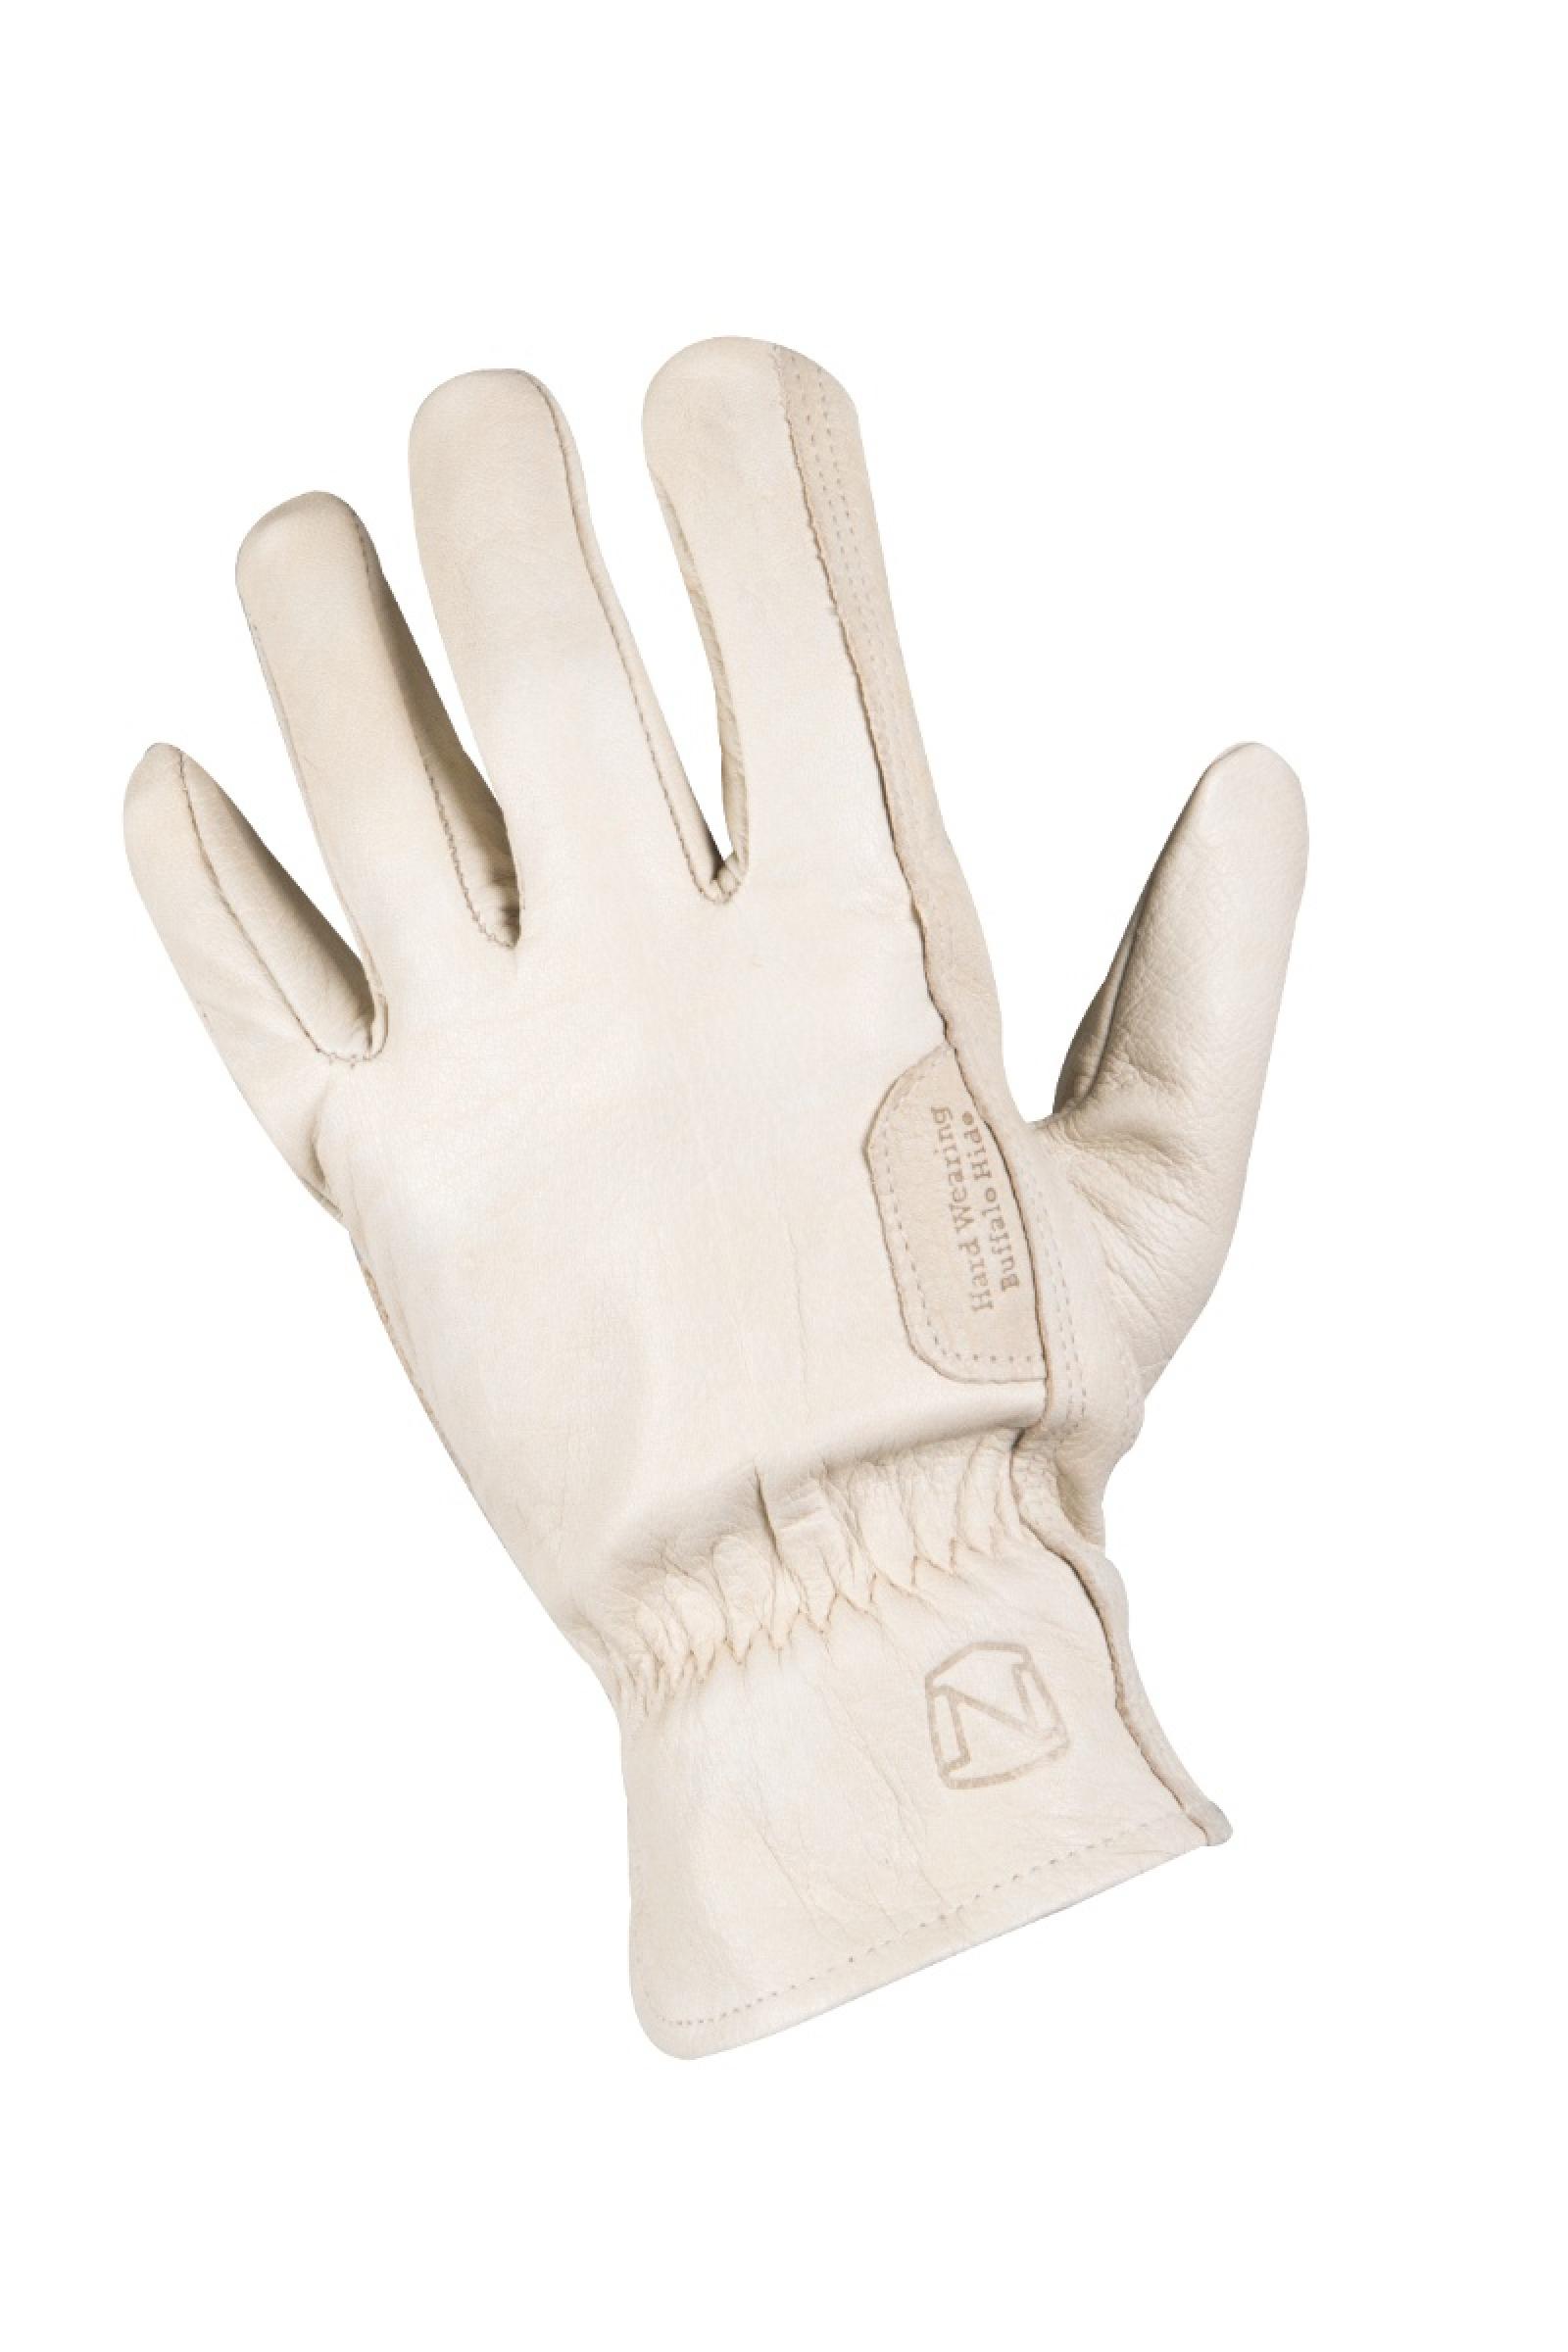 Noble Outfitters Buffalo Leather Work Glove